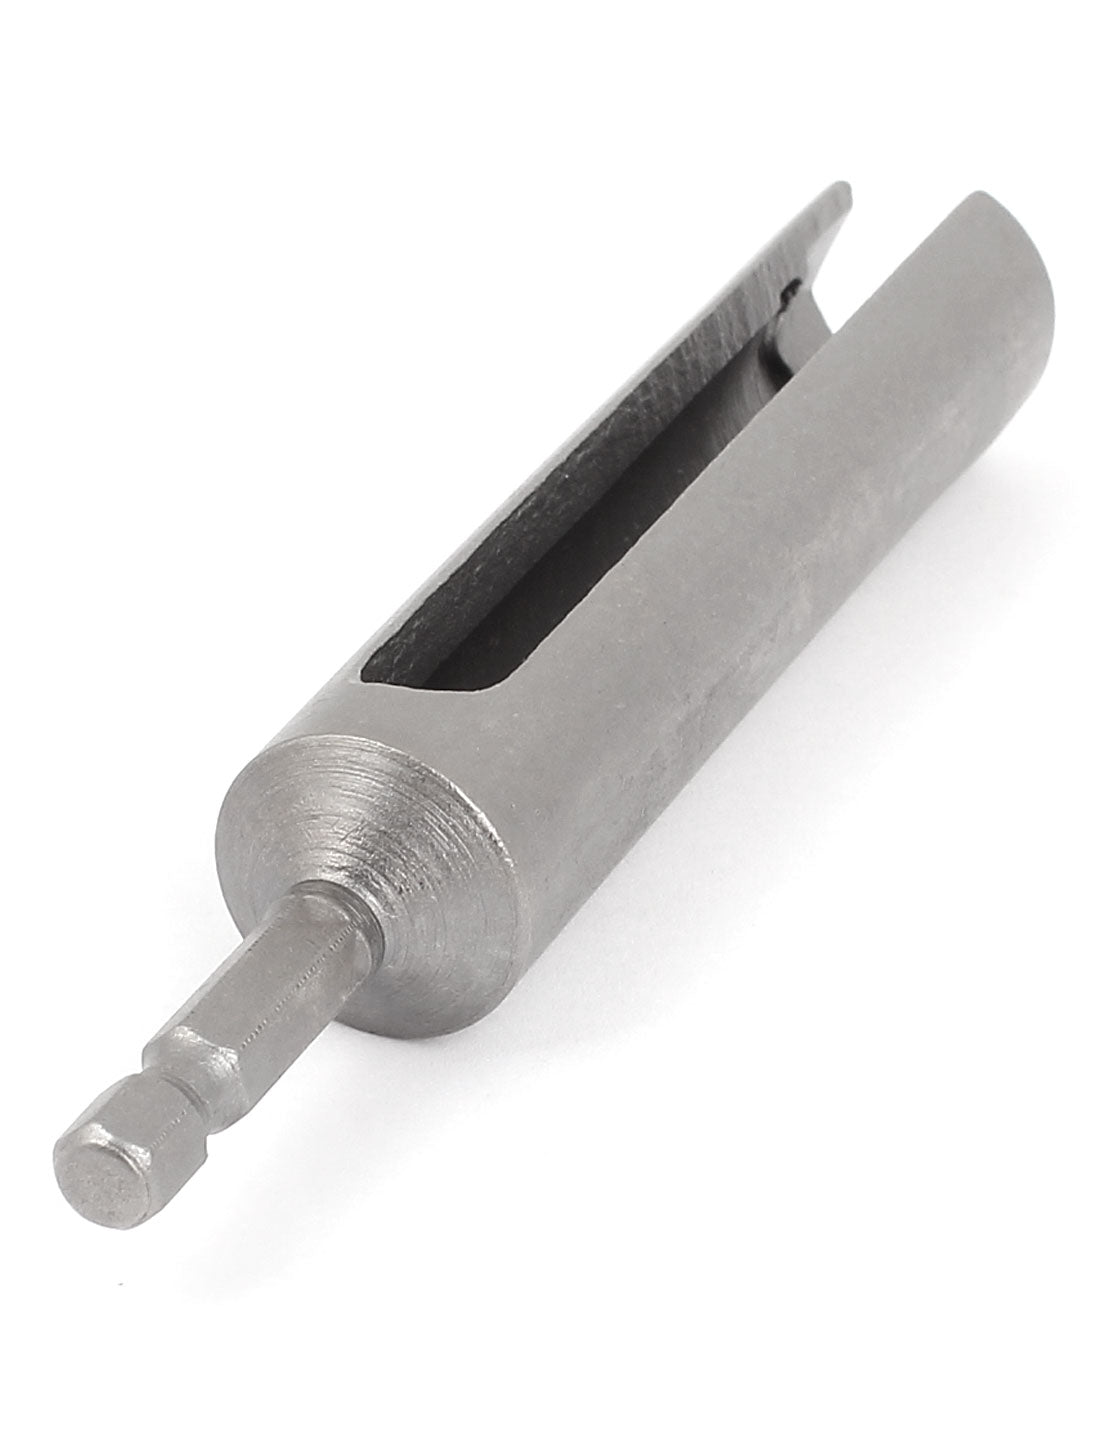 uxcell Uxcell Gray Hex Shank 14mm Hexagon Nut Socket Slotted Extension Driver Bit 5"